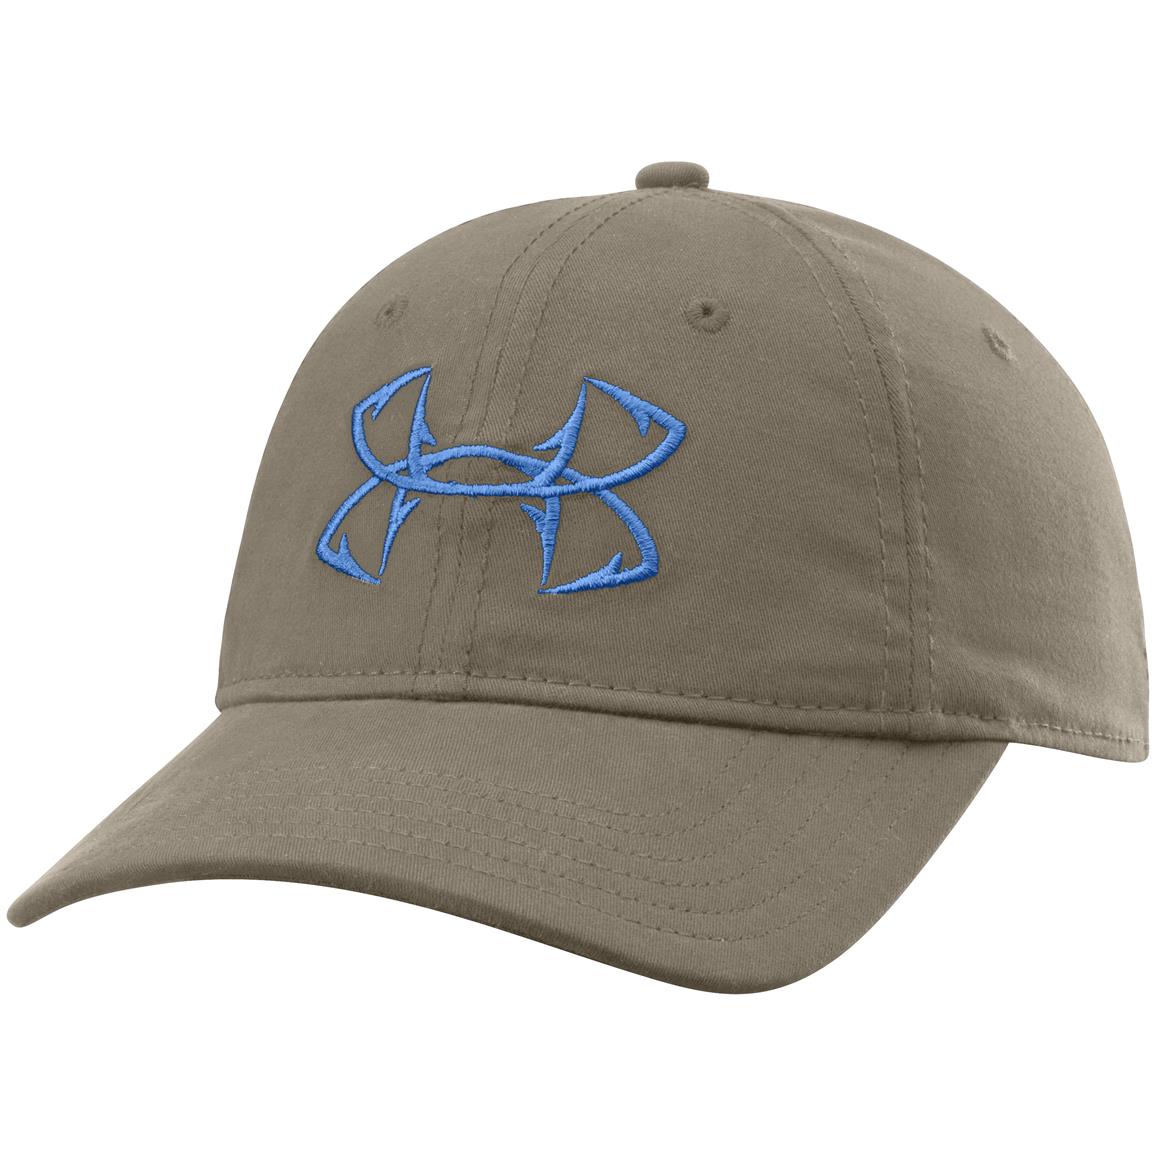 Under Armour Fish Hook Hat 424739, Hats & Caps at